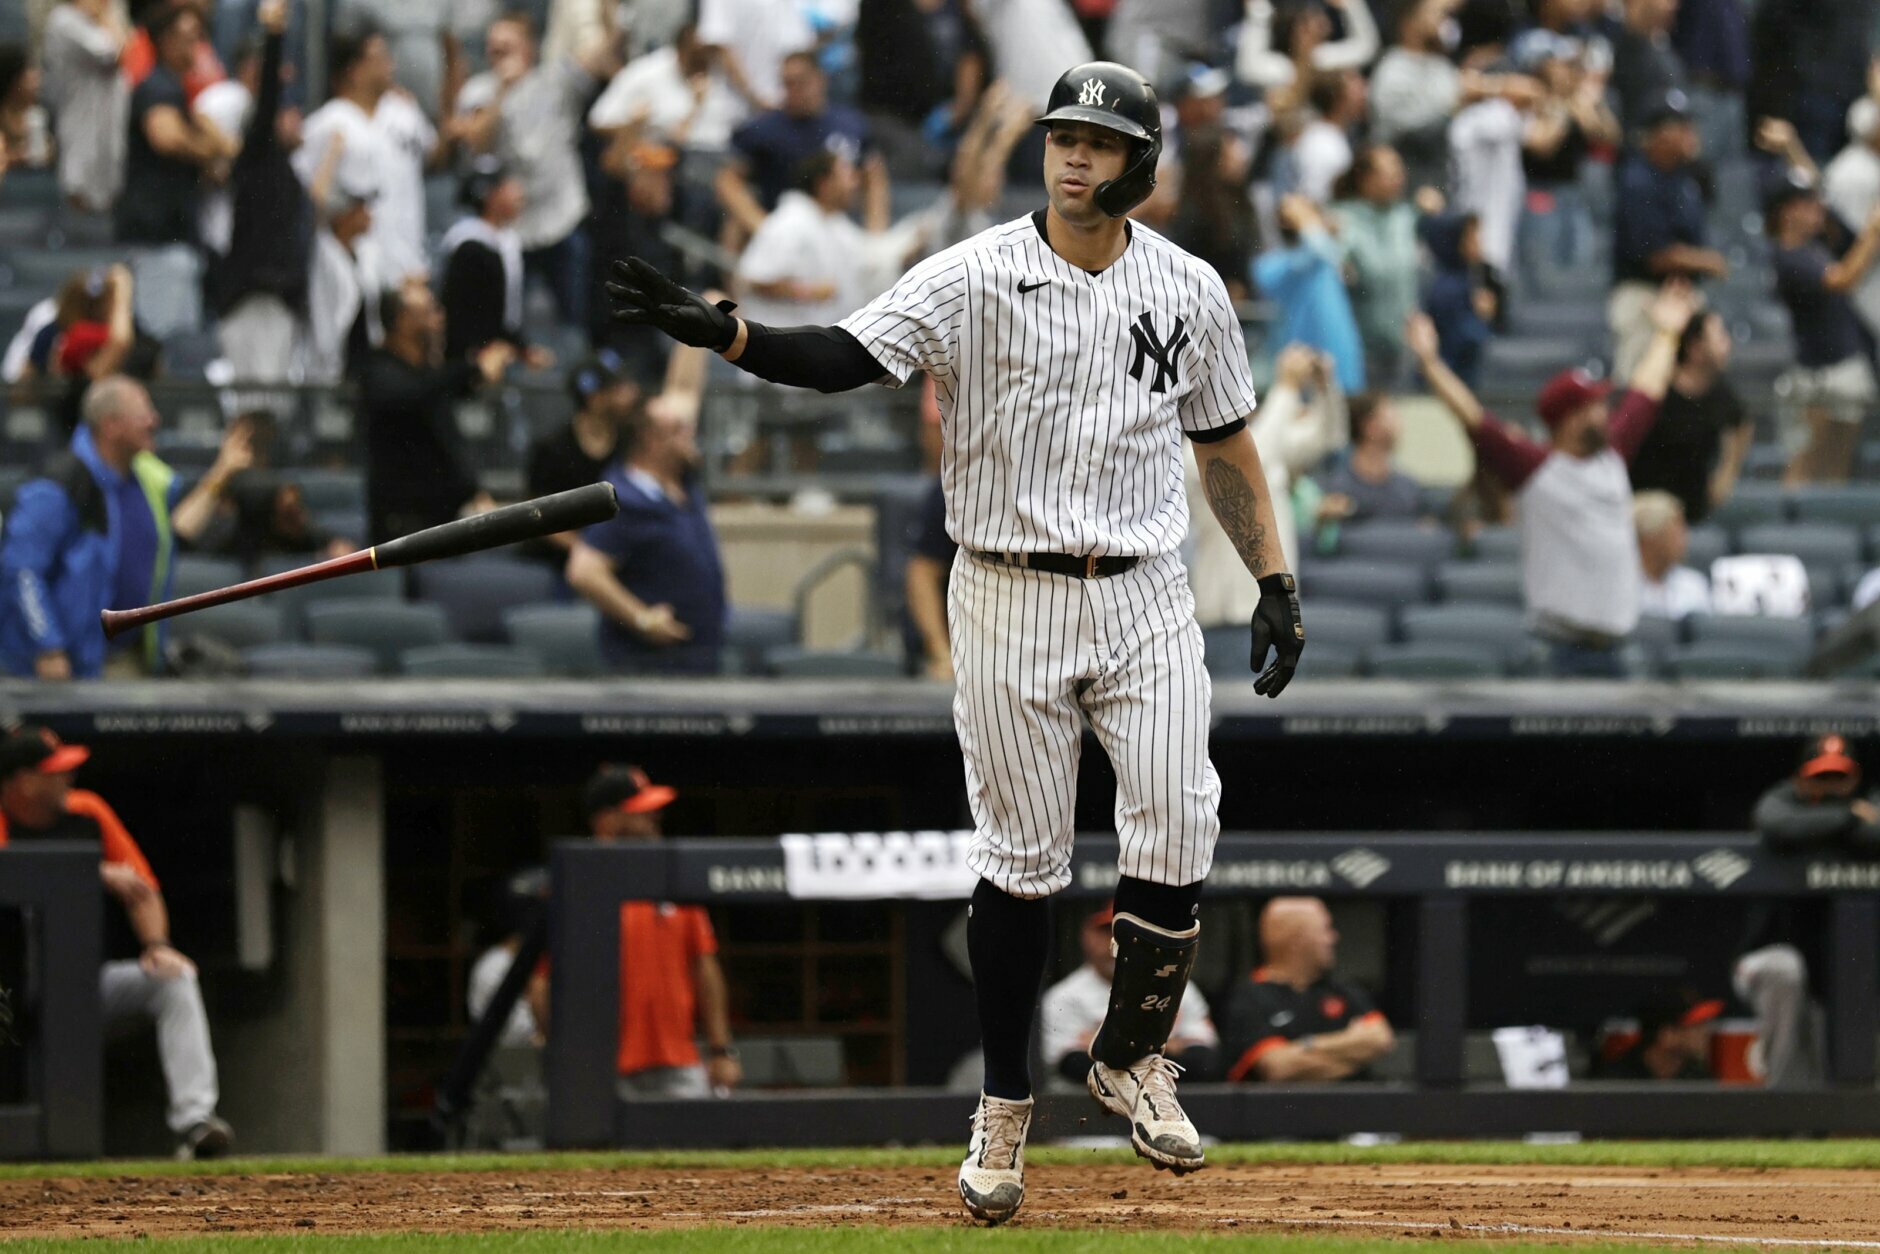 Gary Sanchez lifts Yankees over Blue Jays with pinch-hit HR